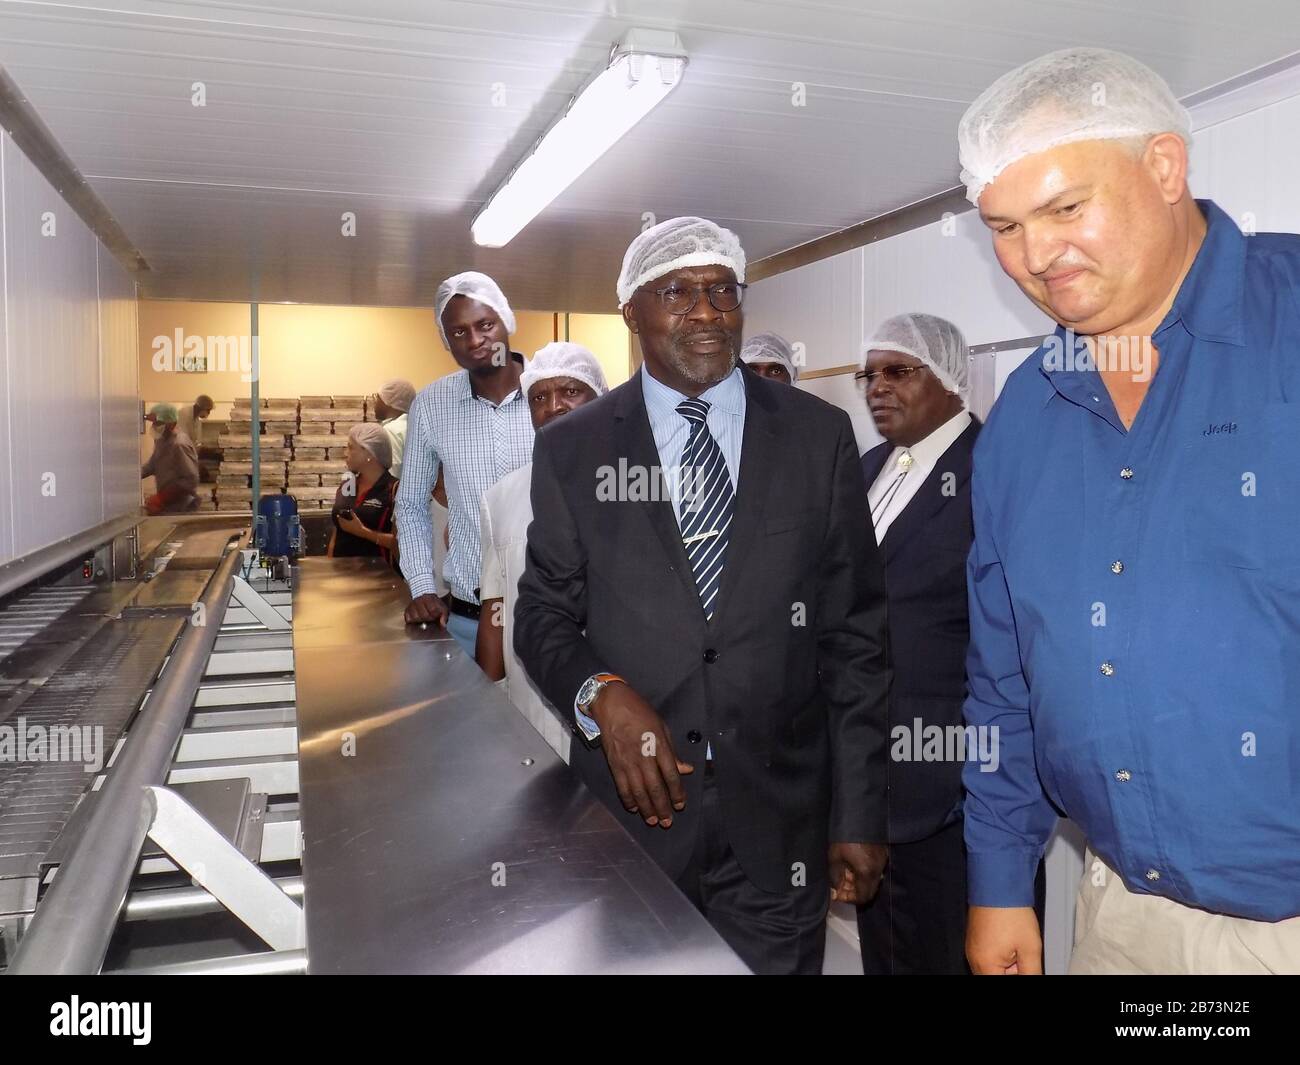 (200313) -- WINDHOEK, March 13, 2020 (Xinhua) -- Namibia's Minister of Industrialization, Trade and SME Development Tjekero Tweya (C) visits a bread manufacturing factory in Windhoek, Namibia, March 12, 2020. Namibia's Minister of Industrialization, Trade and SME Development Tjekero Tweya on Thursday inaugurated the country's first-ever state-of-the-art bread manufacturing factory valued at around 135 million Namibia dollars (about 8.4 million U.S. dollars). The factory system runs like a conveyor belt through the entire process of mixing, fermenting, baking and packaging. (Photo by Musa C Kas Stock Photo